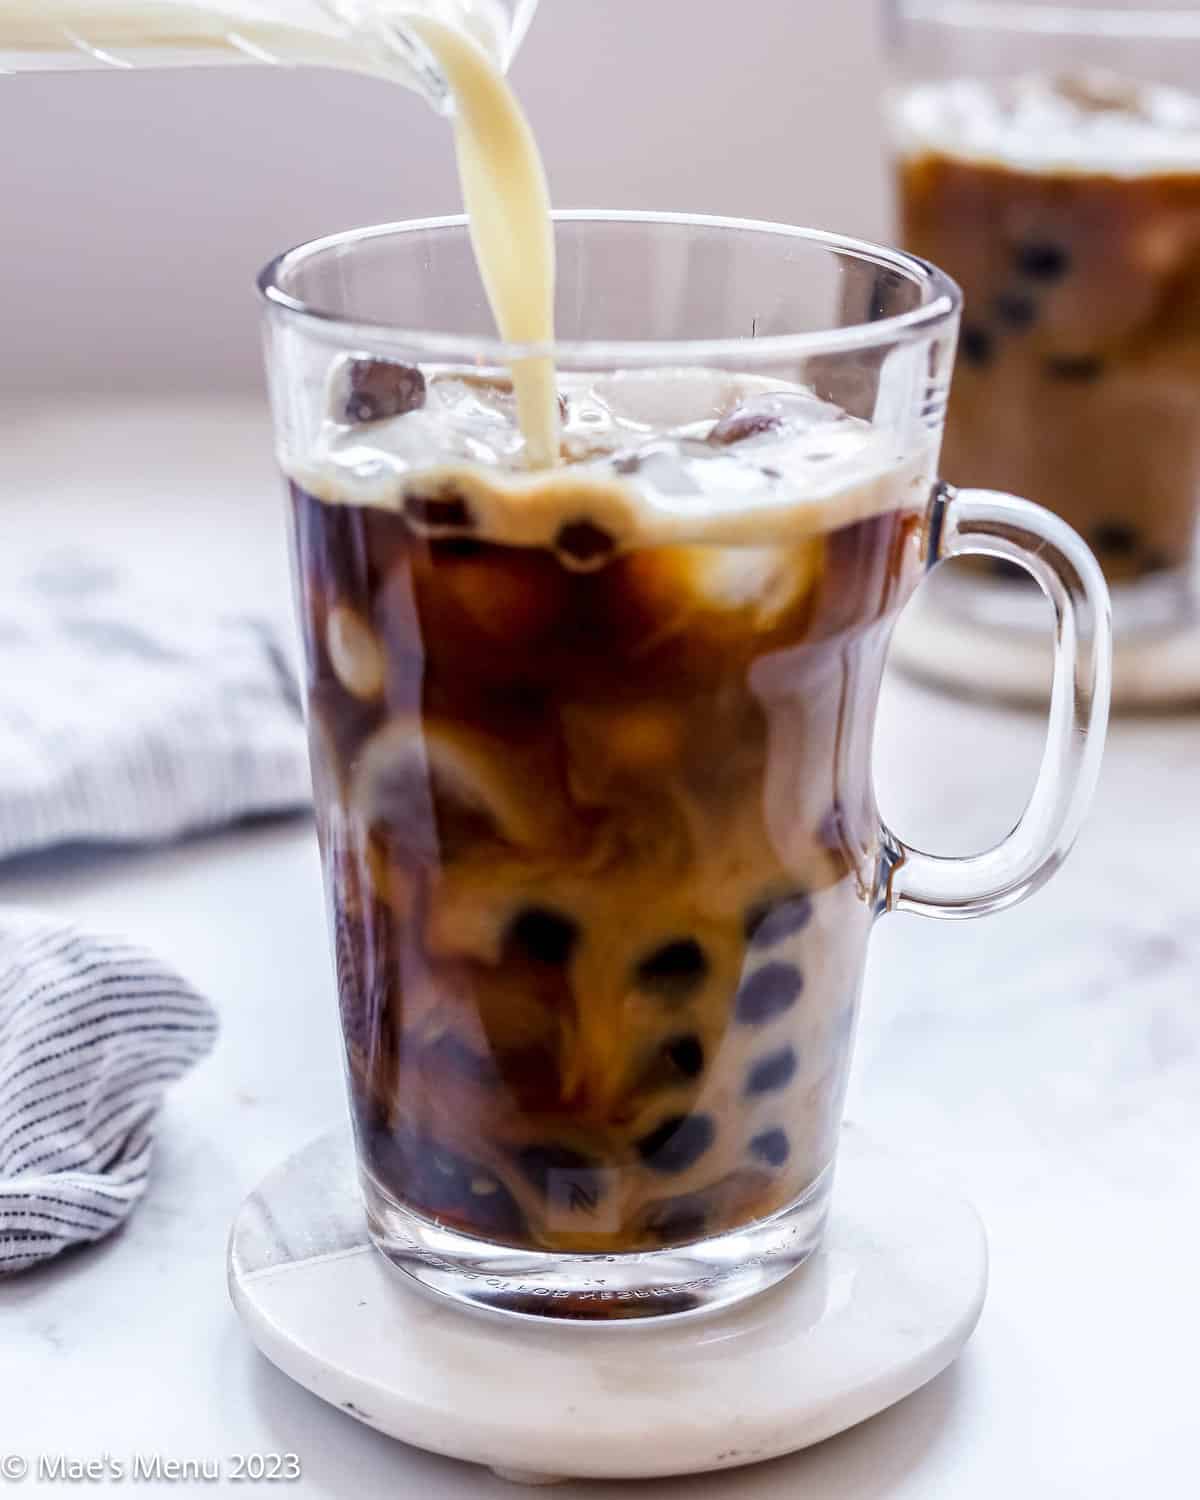 Pouring milk into the glass coffee mug with milk and boba pearls.